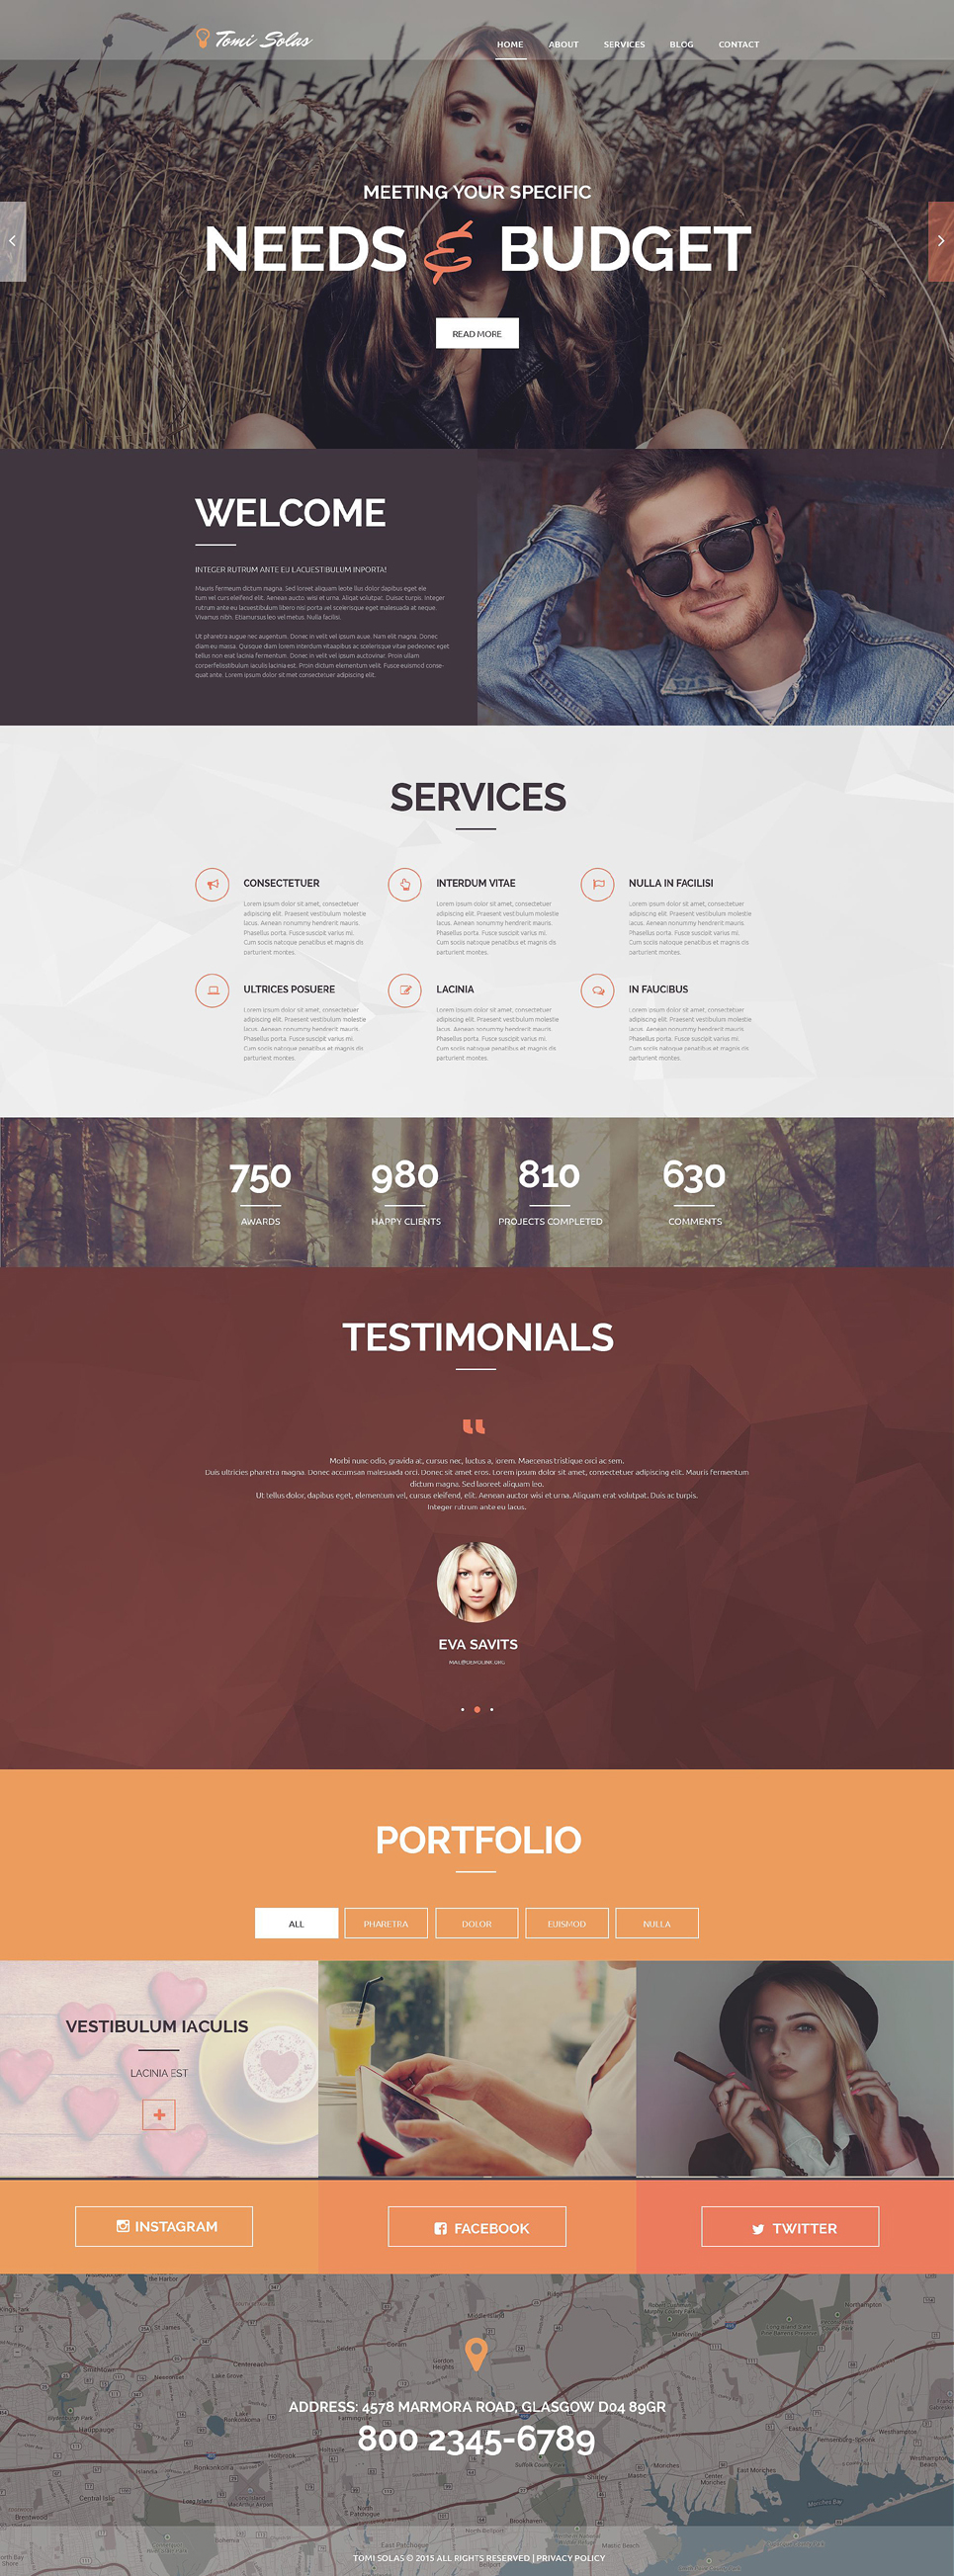 Responsive WordPress Template for Creative Photography